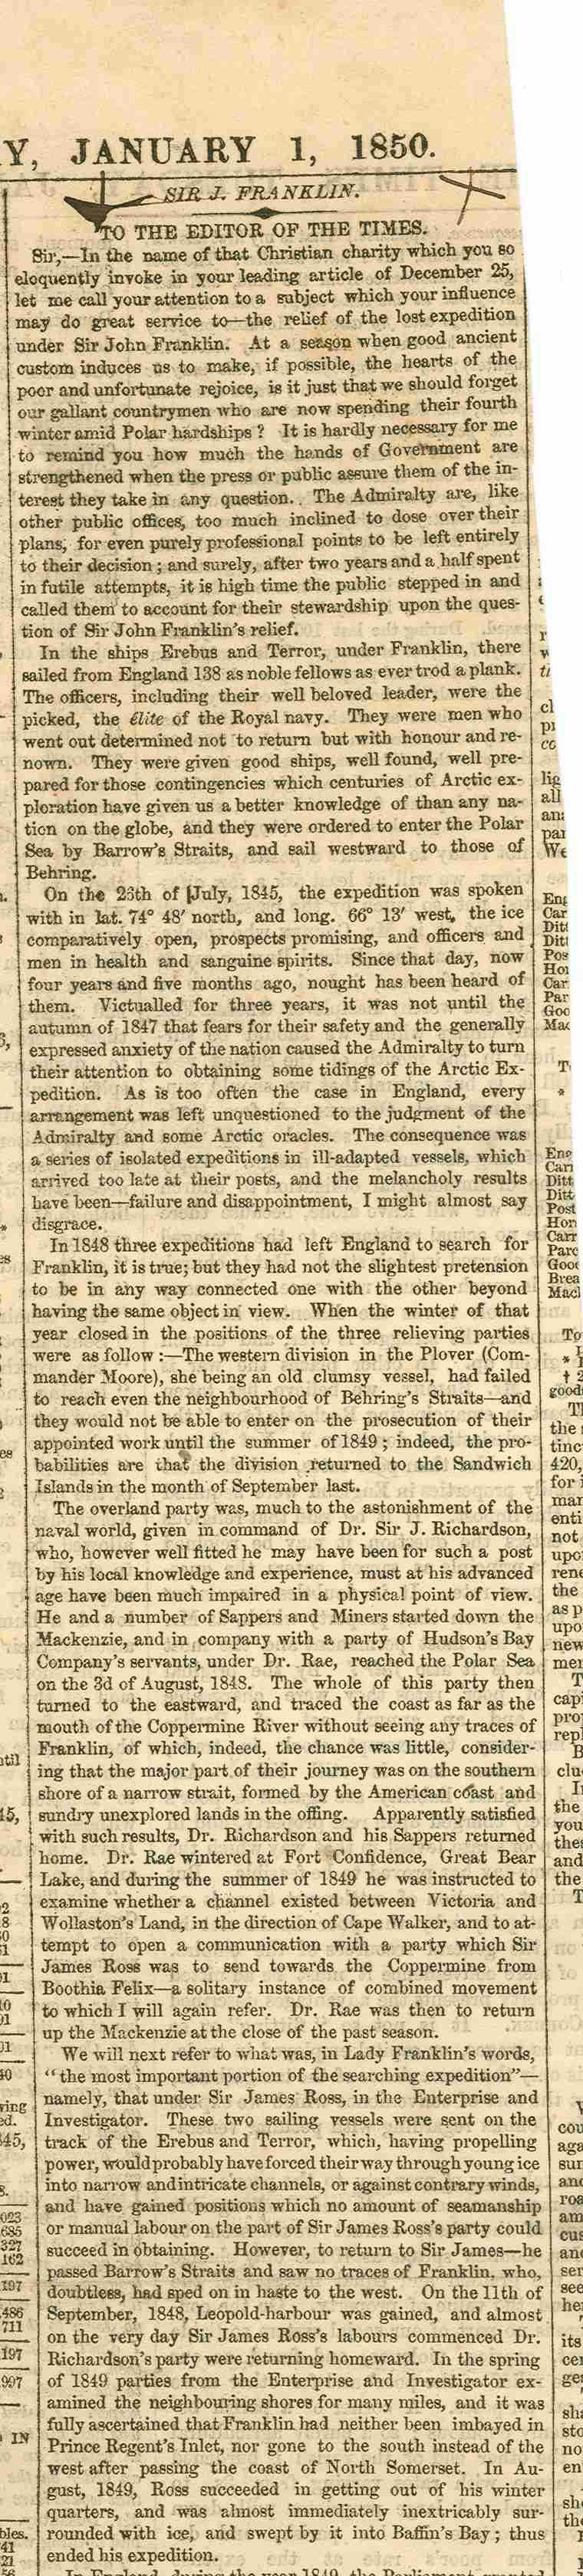 Clippings from The Times re: the search for the third Franklin Expedition